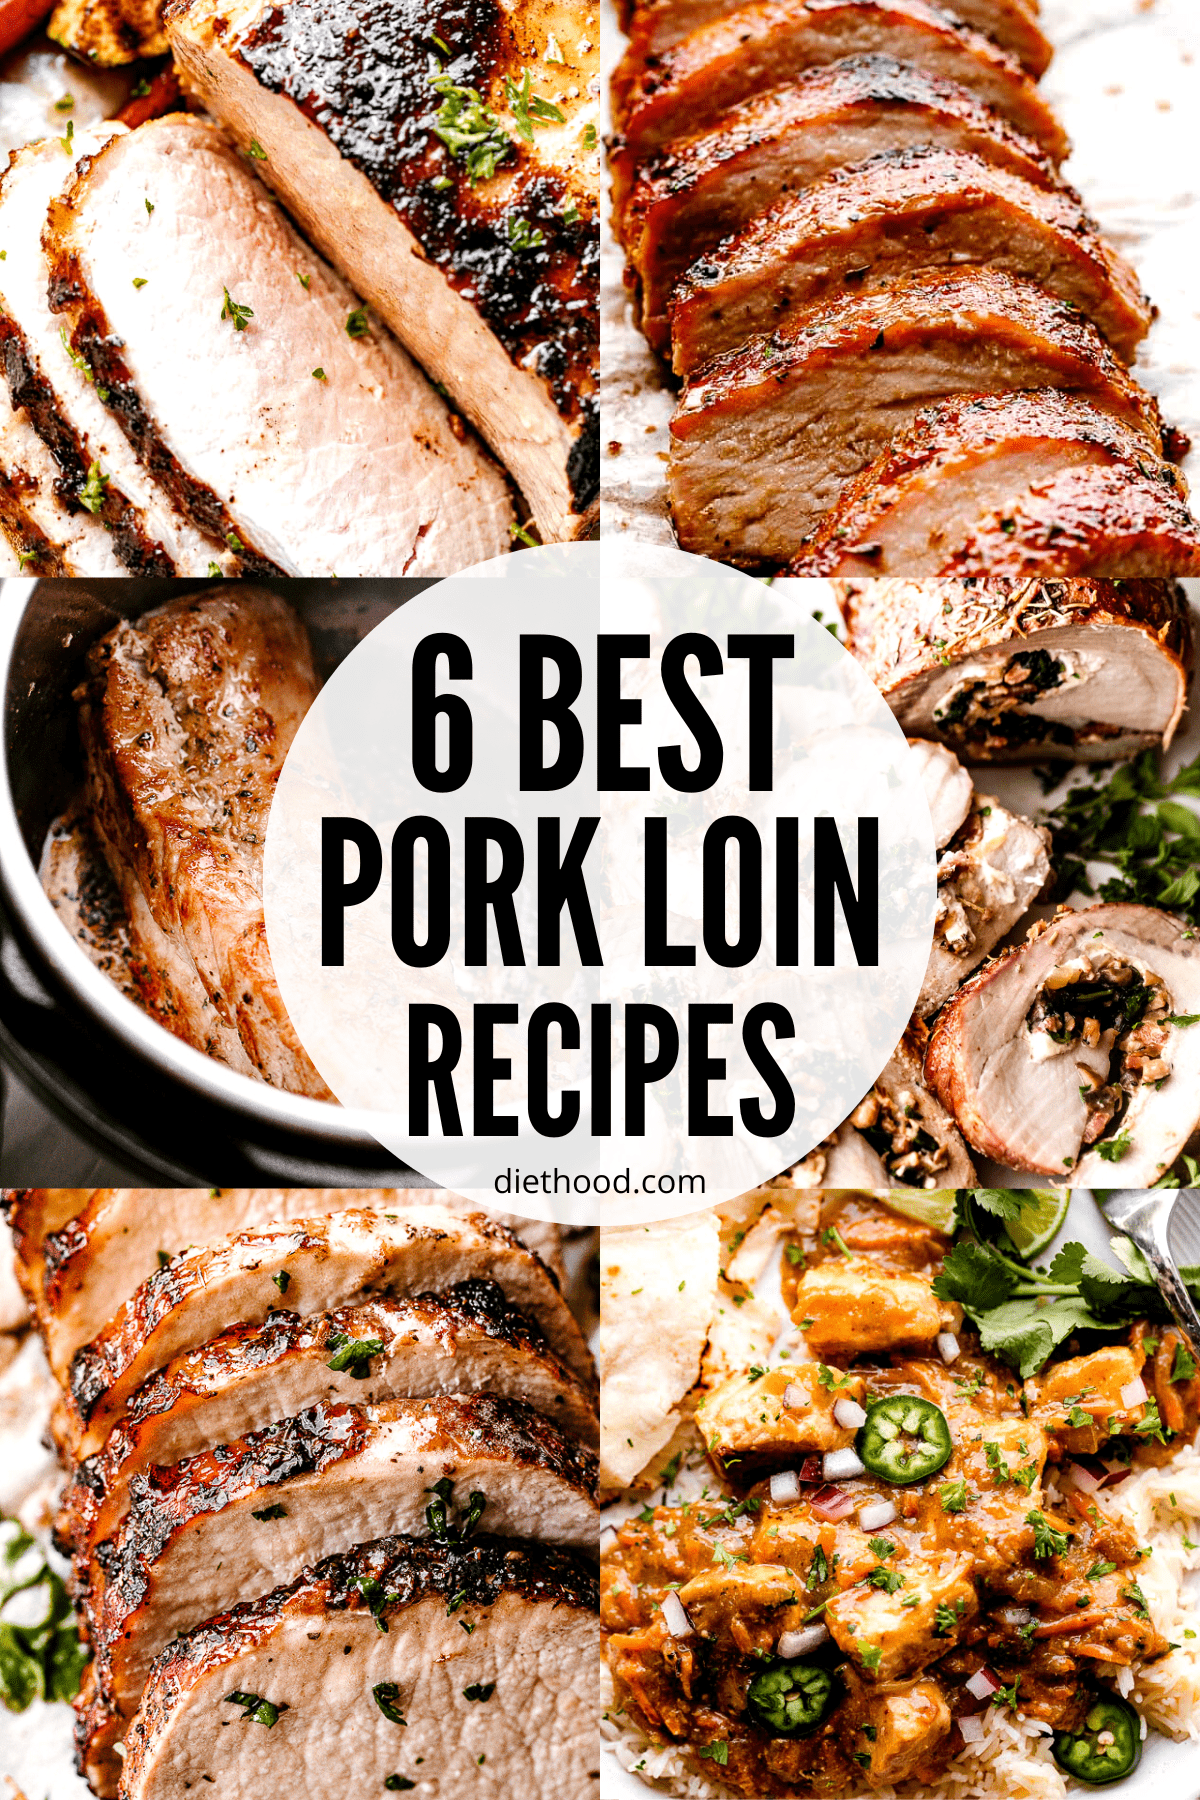 6 of the Best Pork Loin Recipes